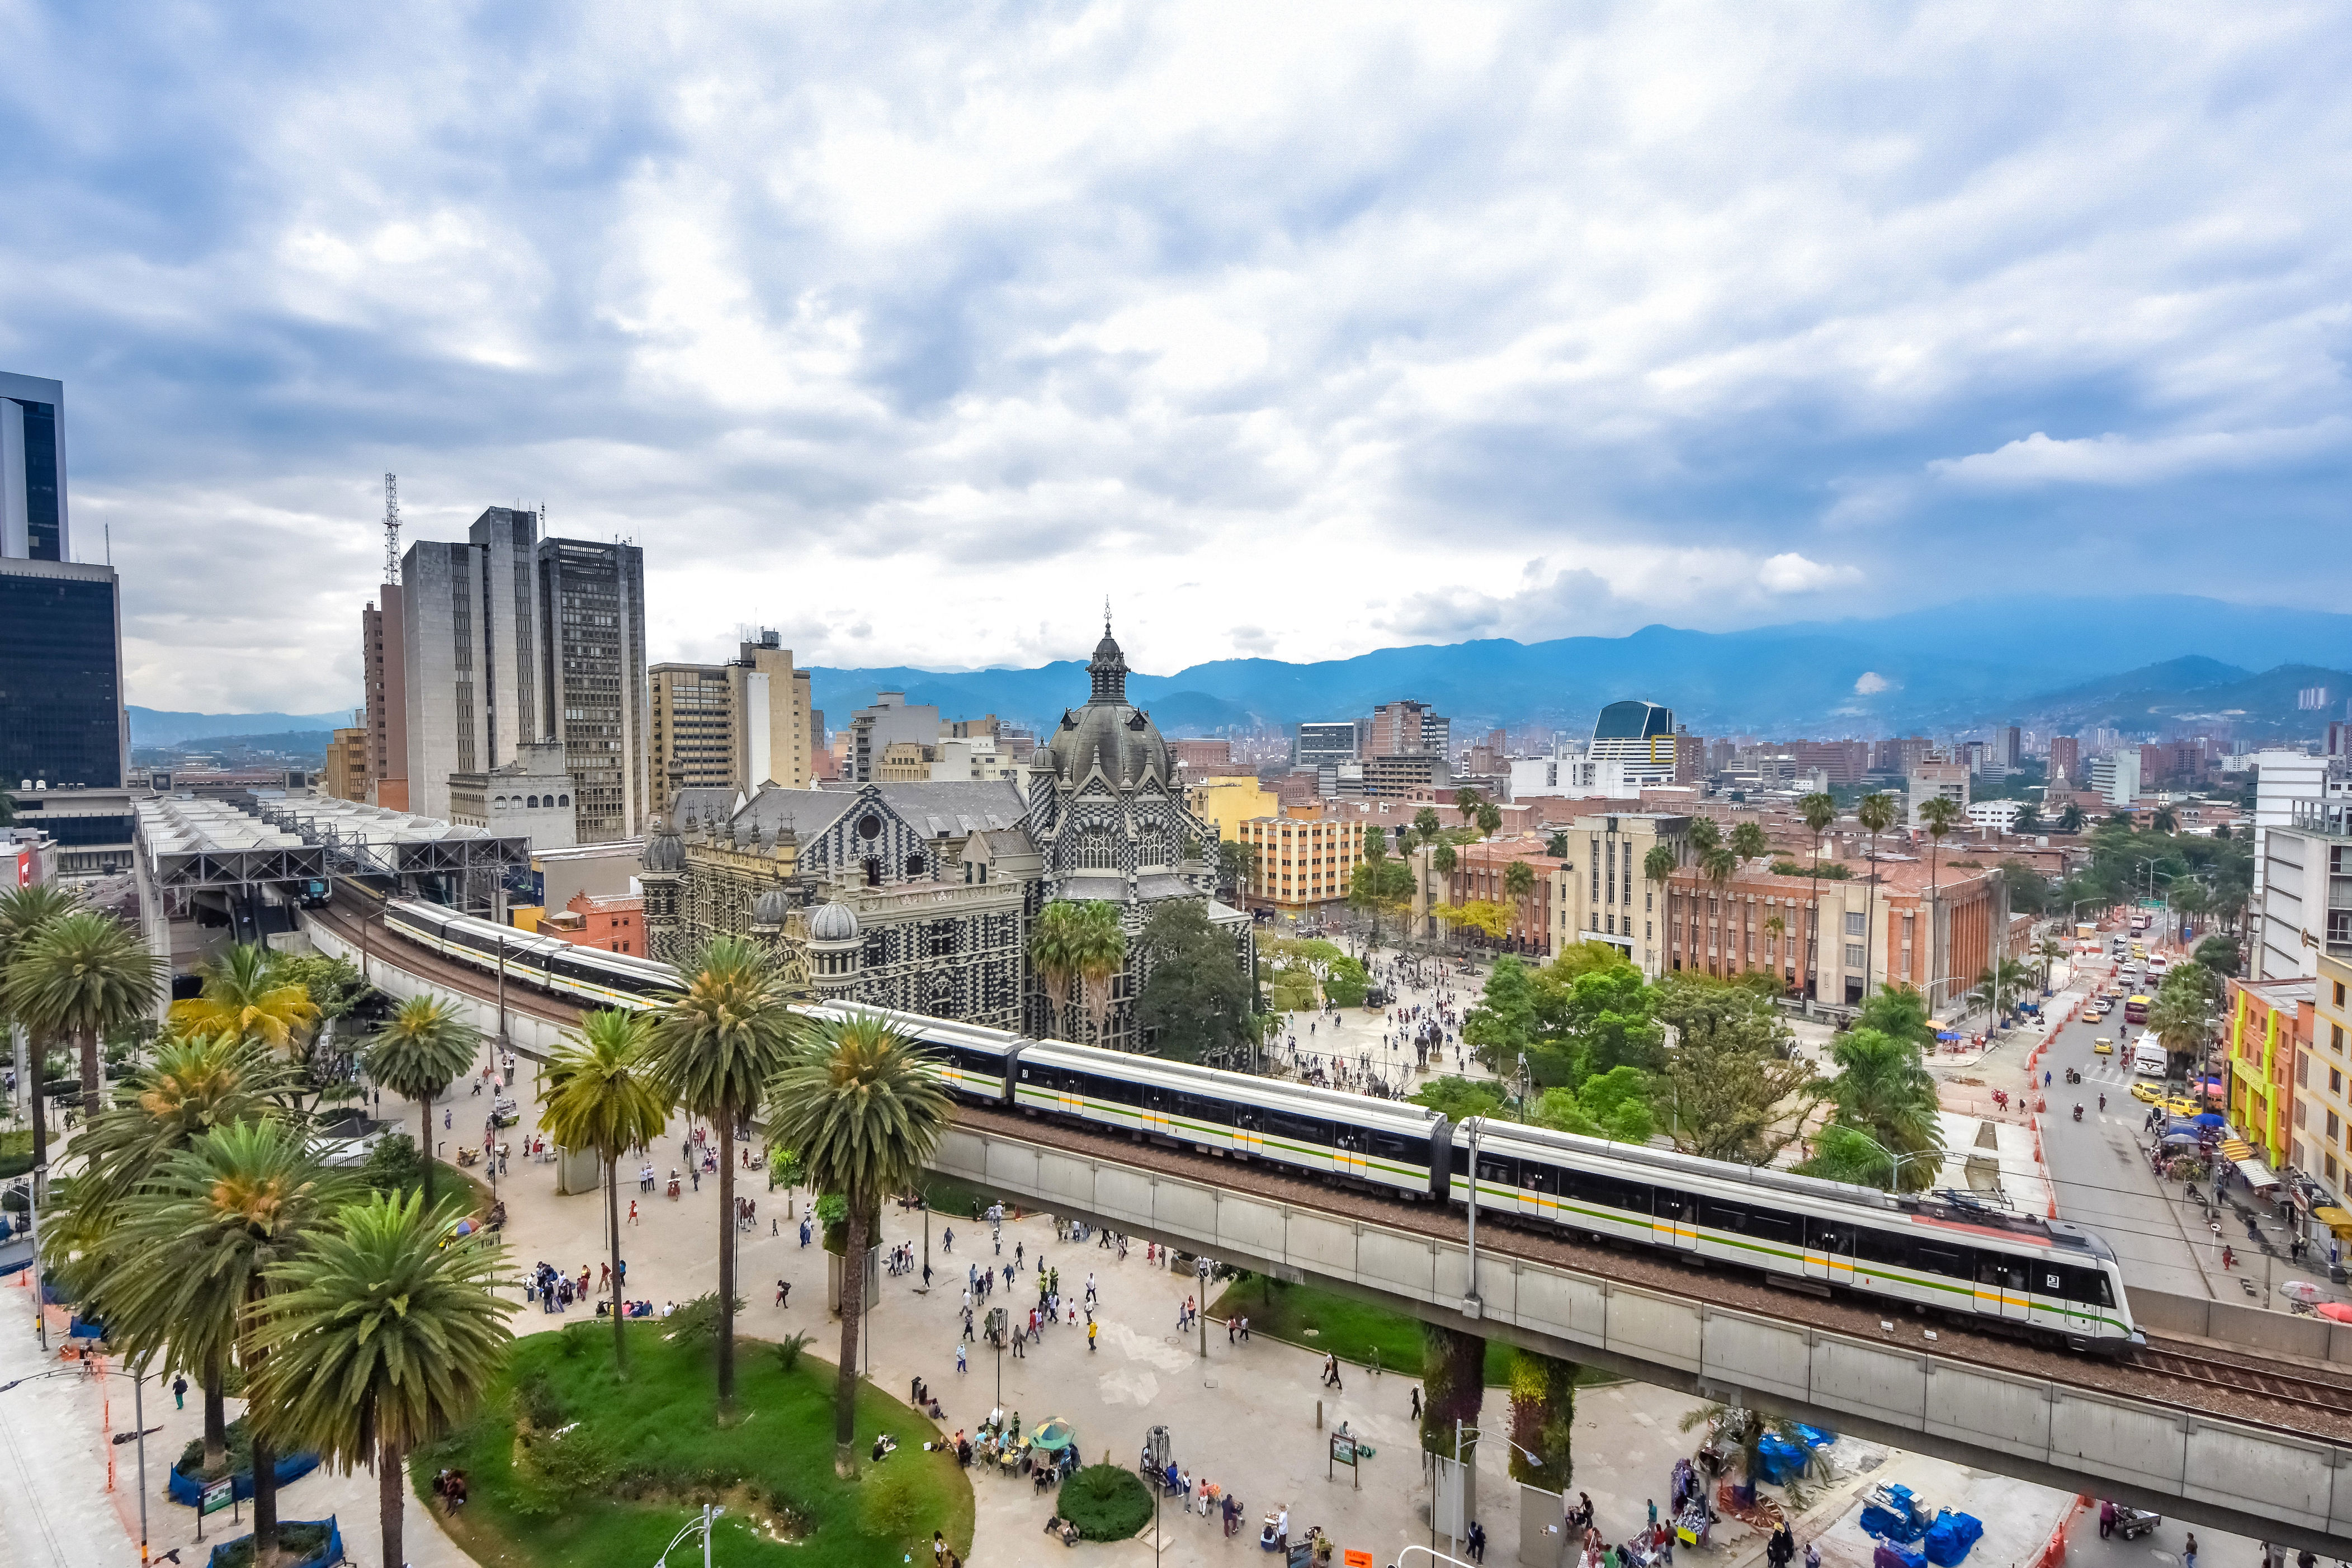 <p><a href="https://www.cntraveler.com/story/how-medellin-plans-to-become-south-americas-first-eco-city?mbid=synd_msn_rss&utm_source=msn&utm_medium=syndication">Medellín’s</a> metro system is a stellar example of how well-executed transit can be fun, functional, and help uplift an entire city.</p> <p>The Metro de Medellín opened in 1995 and is the only rail-based transit system in <a href="https://www.cntraveler.com/tag/colombia?mbid=synd_msn_rss&utm_source=msn&utm_medium=syndication">Colombia</a>. In addition to its clean and rapid rail options, the city is also served by a tram, a bus rapid transit line, and hundreds of other bus lines—many of which can be used in conjunction with the Metro.</p> <p>The real show stopper is the Metrocable, a gondola lift system with a 7-line network that soars over the city and connects numerous neighborhoods.</p> <p>Though cable cars have typically been used for tourism, Medellín was the first city to include them as part of a mass public transportation system. The cable cars connect downtown Medellín to communities isolated by the steep hills surrounding the mountainous city—in some cases cutting a 2 hour commute to just 30 minutes. Medellín’s Metro was thoughtfully-planned with community input and is a symbol of pride for the city.</p> <p><strong>How to experience it:</strong> Take in the lush hillsides around Medellin while riding Metrocable Line K to <a href="https://parquearvi.org/">Parque Arvi</a> where you can find unbeatable bird-watching, wildflowers, and over 50 miles of hiking trails.</p><p>Sign up to receive the latest news, expert tips, and inspiration on all things travel</p><a href="https://www.cntraveler.com/newsletter/the-daily?sourceCode=msnsend">Inspire Me</a>